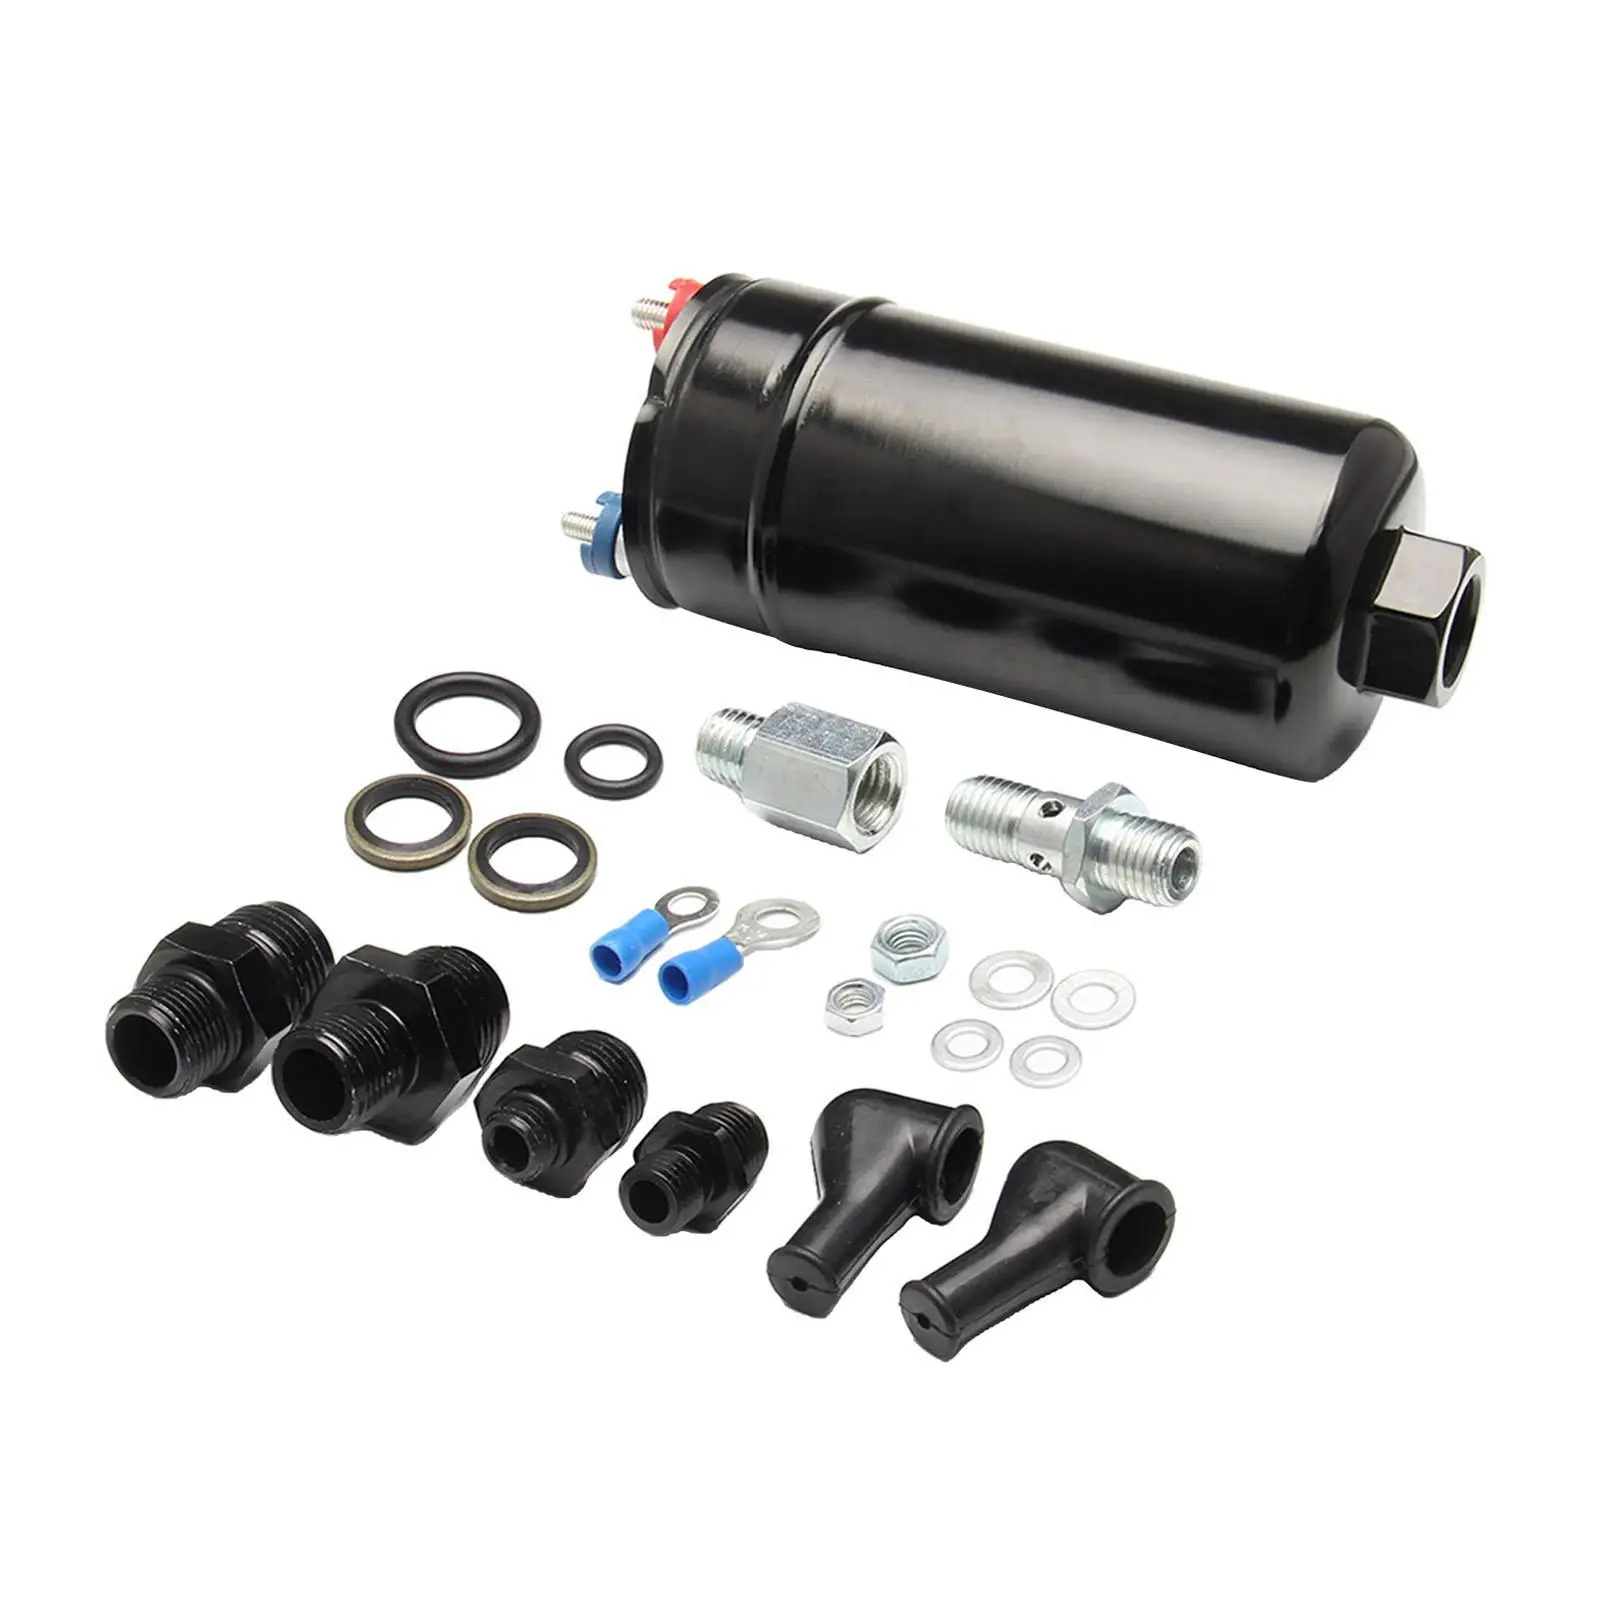 Universal External Inline Fuel Pump/ 0580254044 Replace 300Lph 2V/ for 044 85 Only for Gasoline Car.